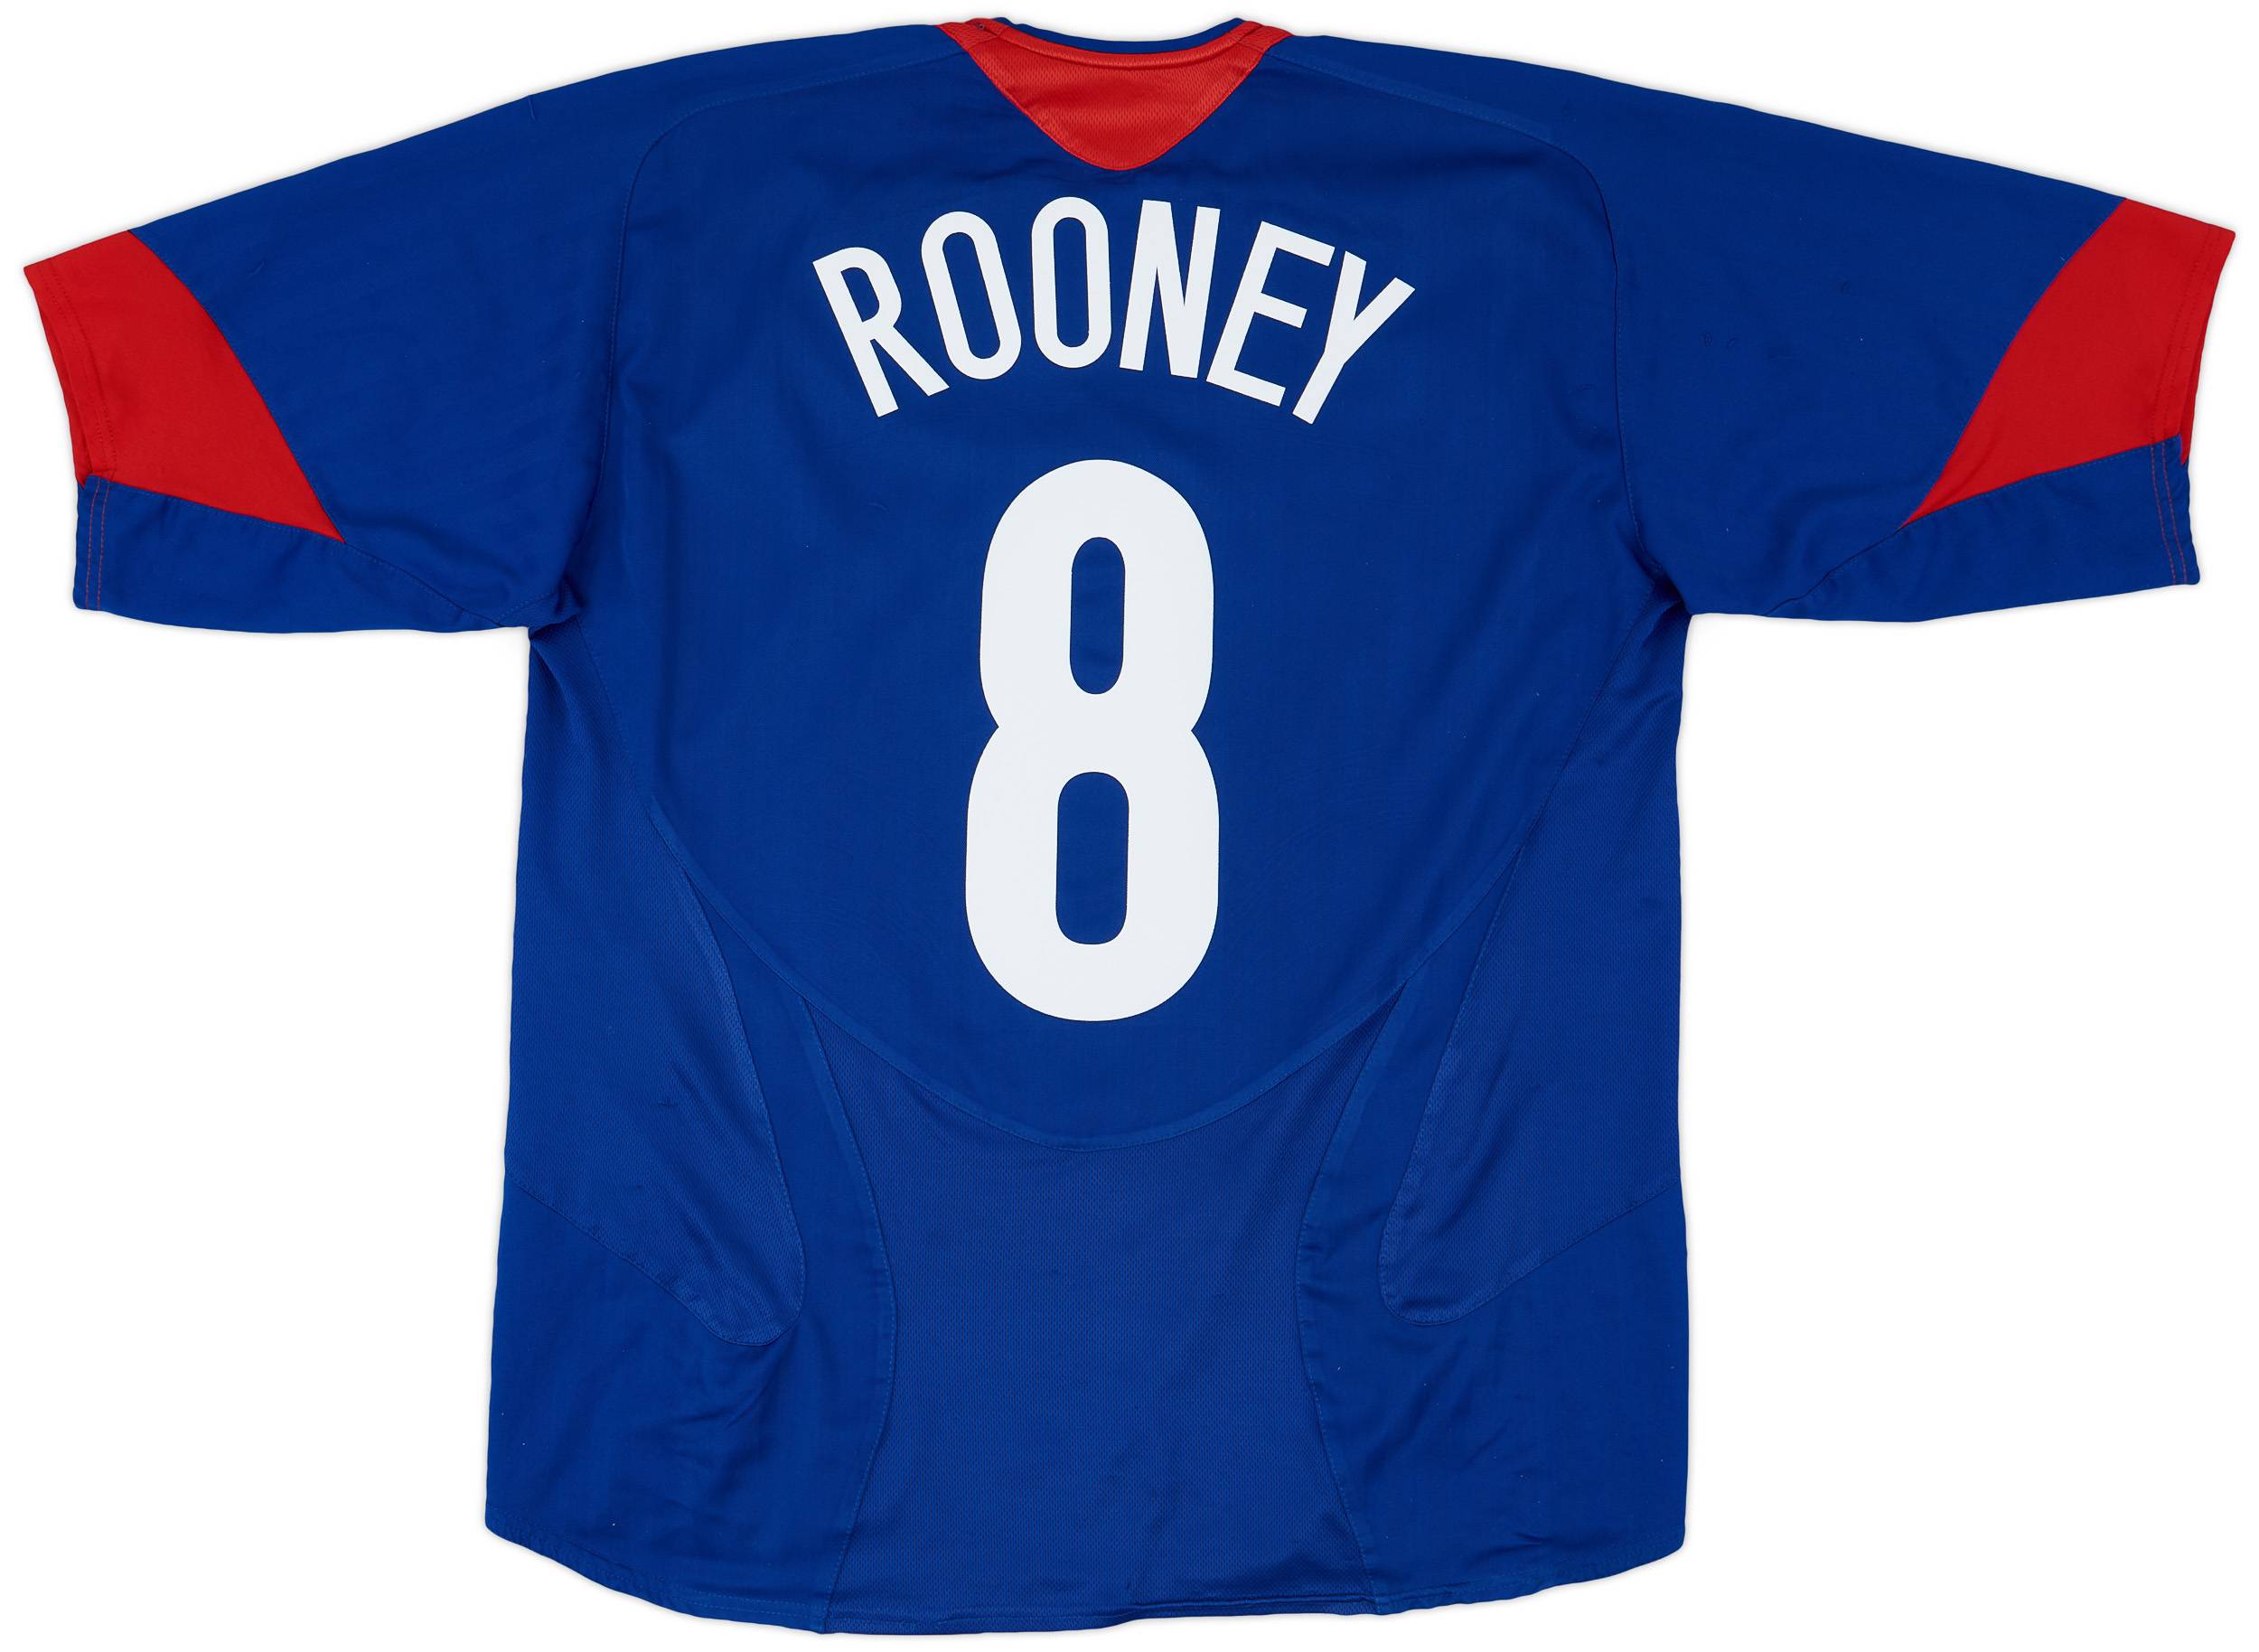 2005-06 Manchester United Away Shirt Rooney #8 - 8/10 - (L)